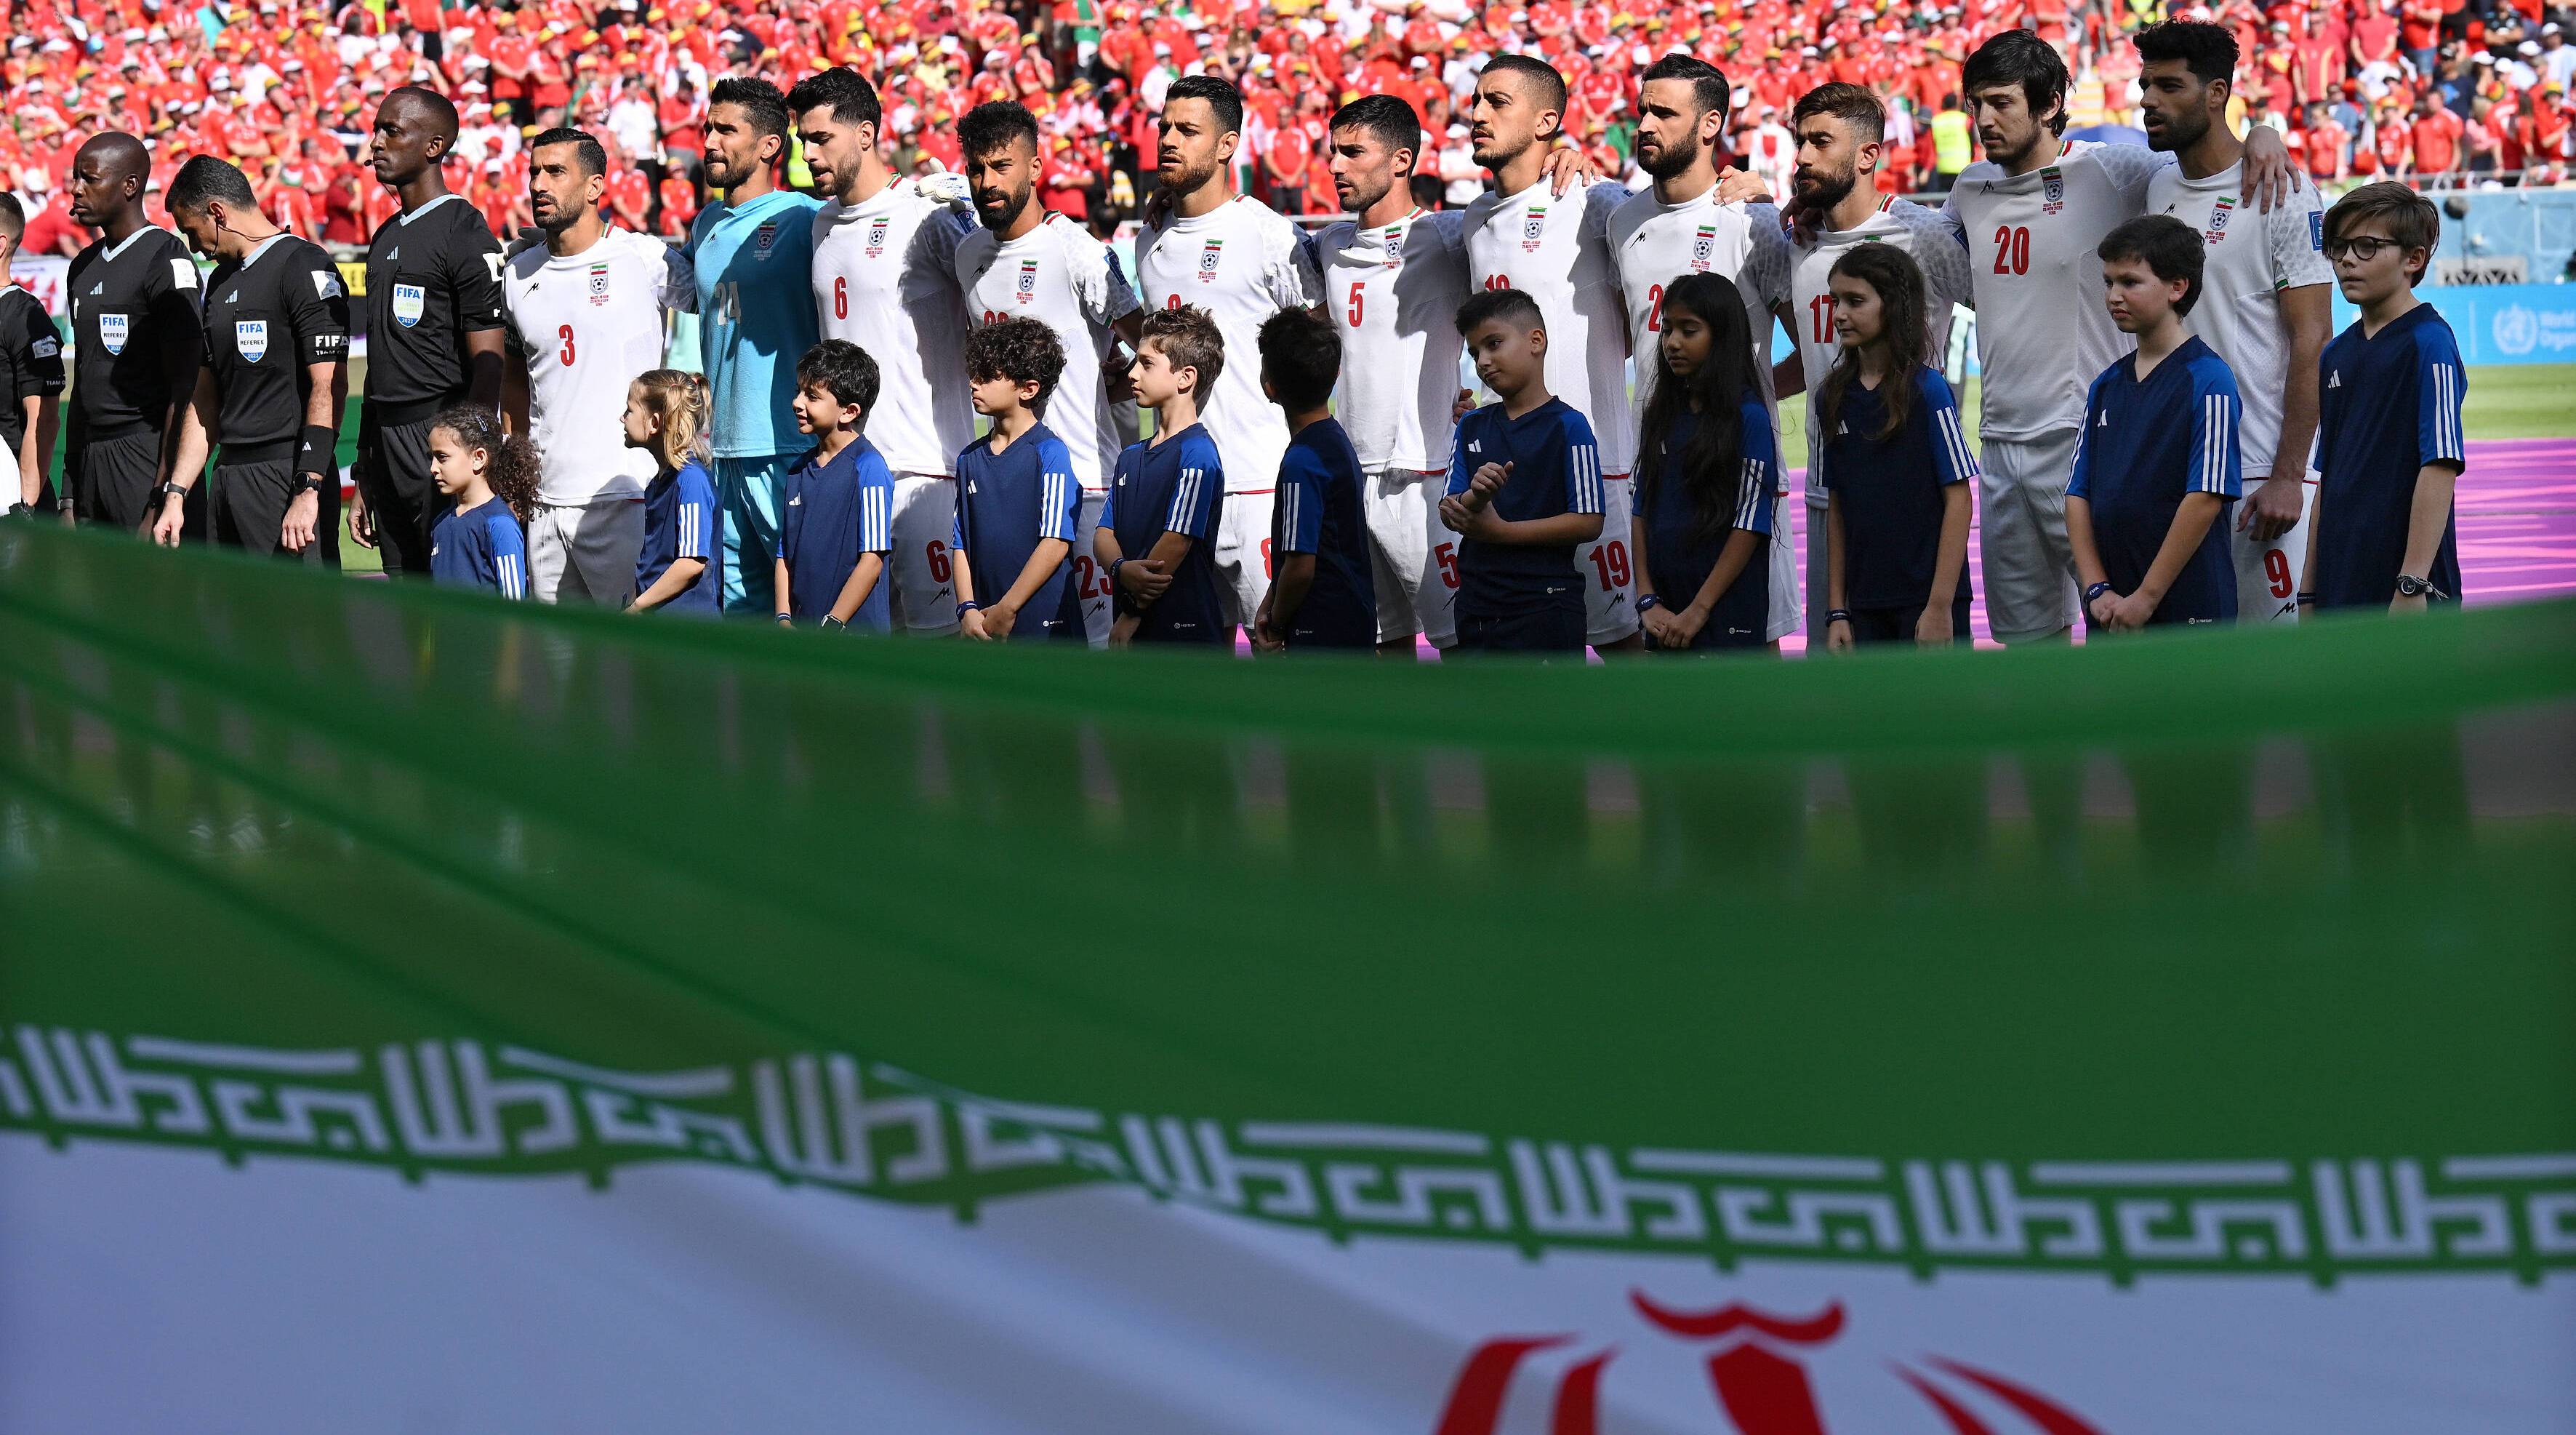 Iran Threatens to Torture Players’ Families Ahead of USMNT Match, per Report thumbnail